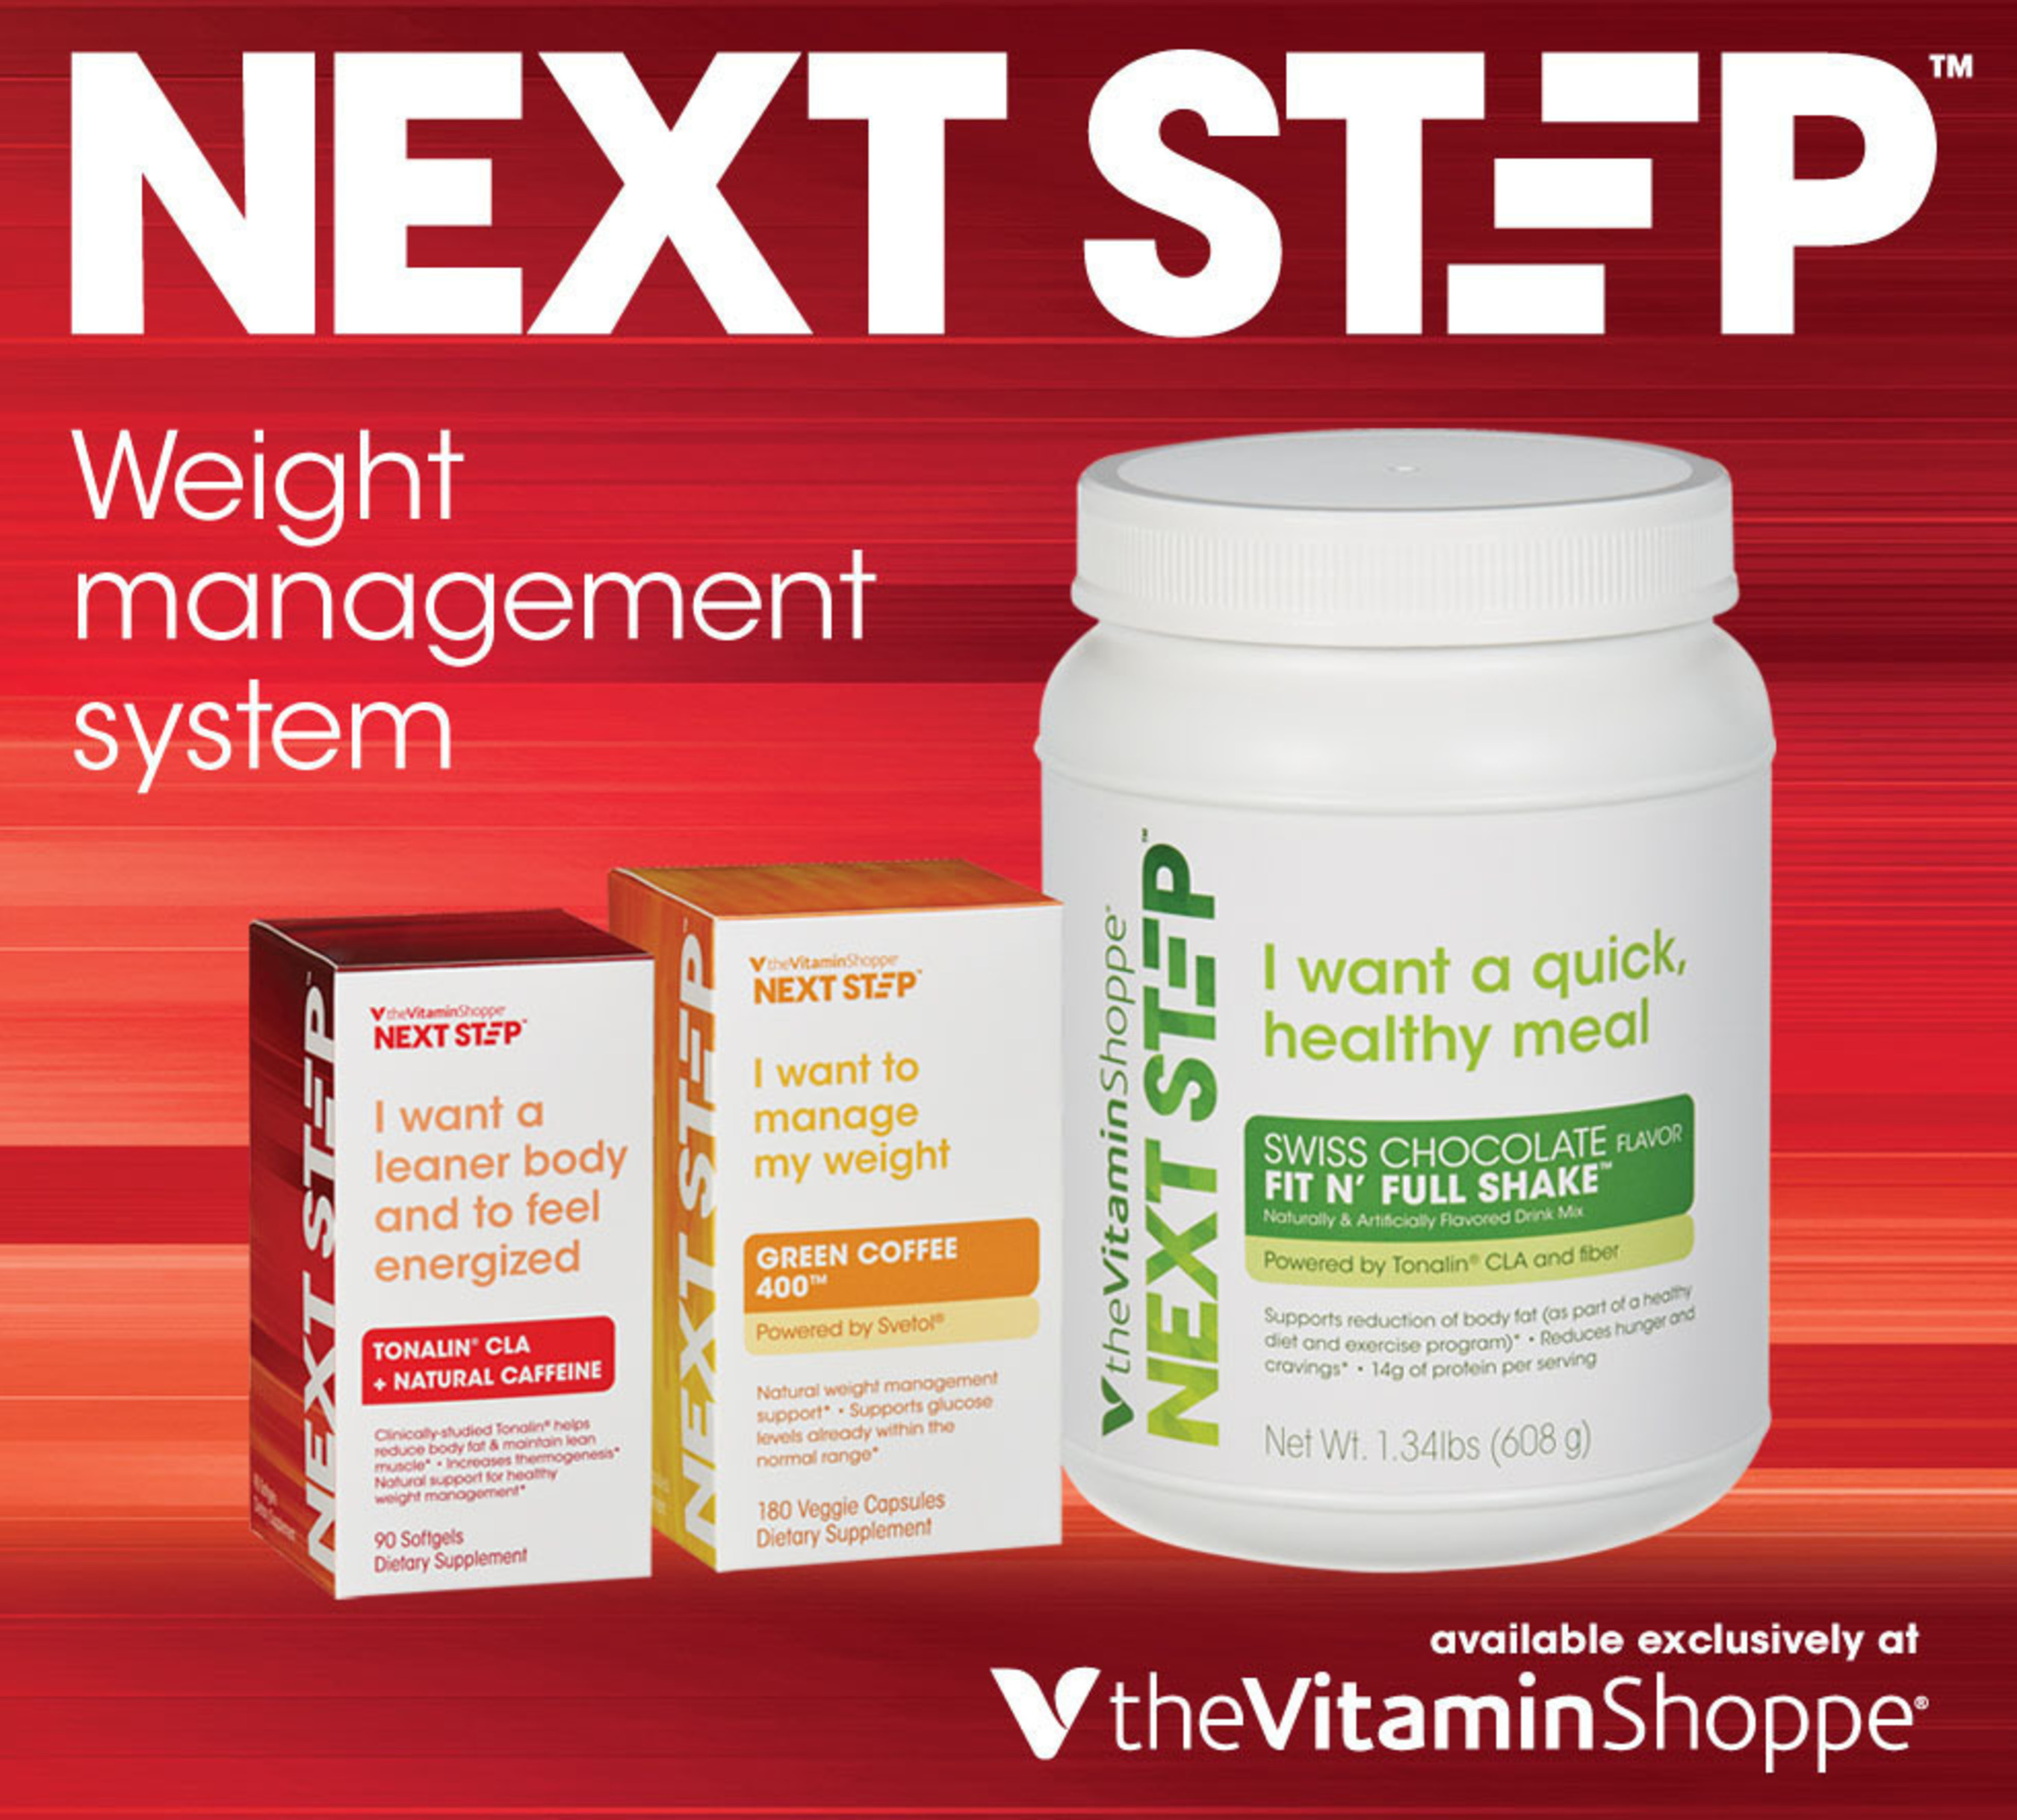 The Vitamin Shoppe(R) introduces Next Step(TM), a new weight management line that can be personalized to wherever an individual is on their health and wellness journey. (PRNewsFoto/The Vitamin Shoppe) (PRNewsFoto/THE VITAMIN SHOPPE)